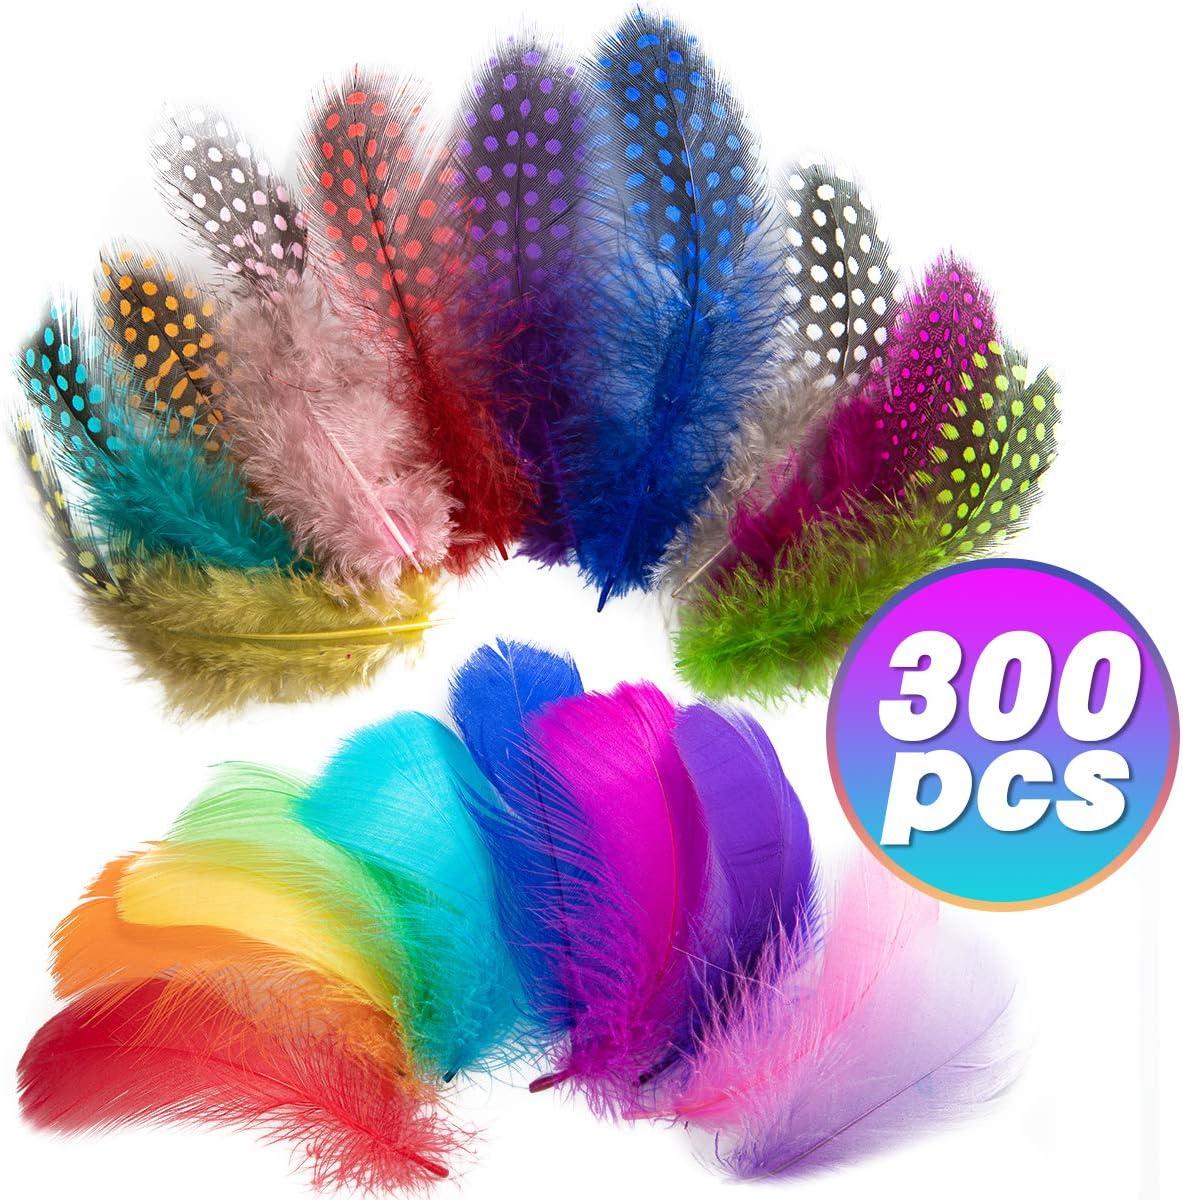 800pcs Colorful Feathers 16 Colors Craft Feathers Bulk Chicken Feathers for  Kindergarten DIY Crafts,Wedding Home Party Decorations,Dream Catcher